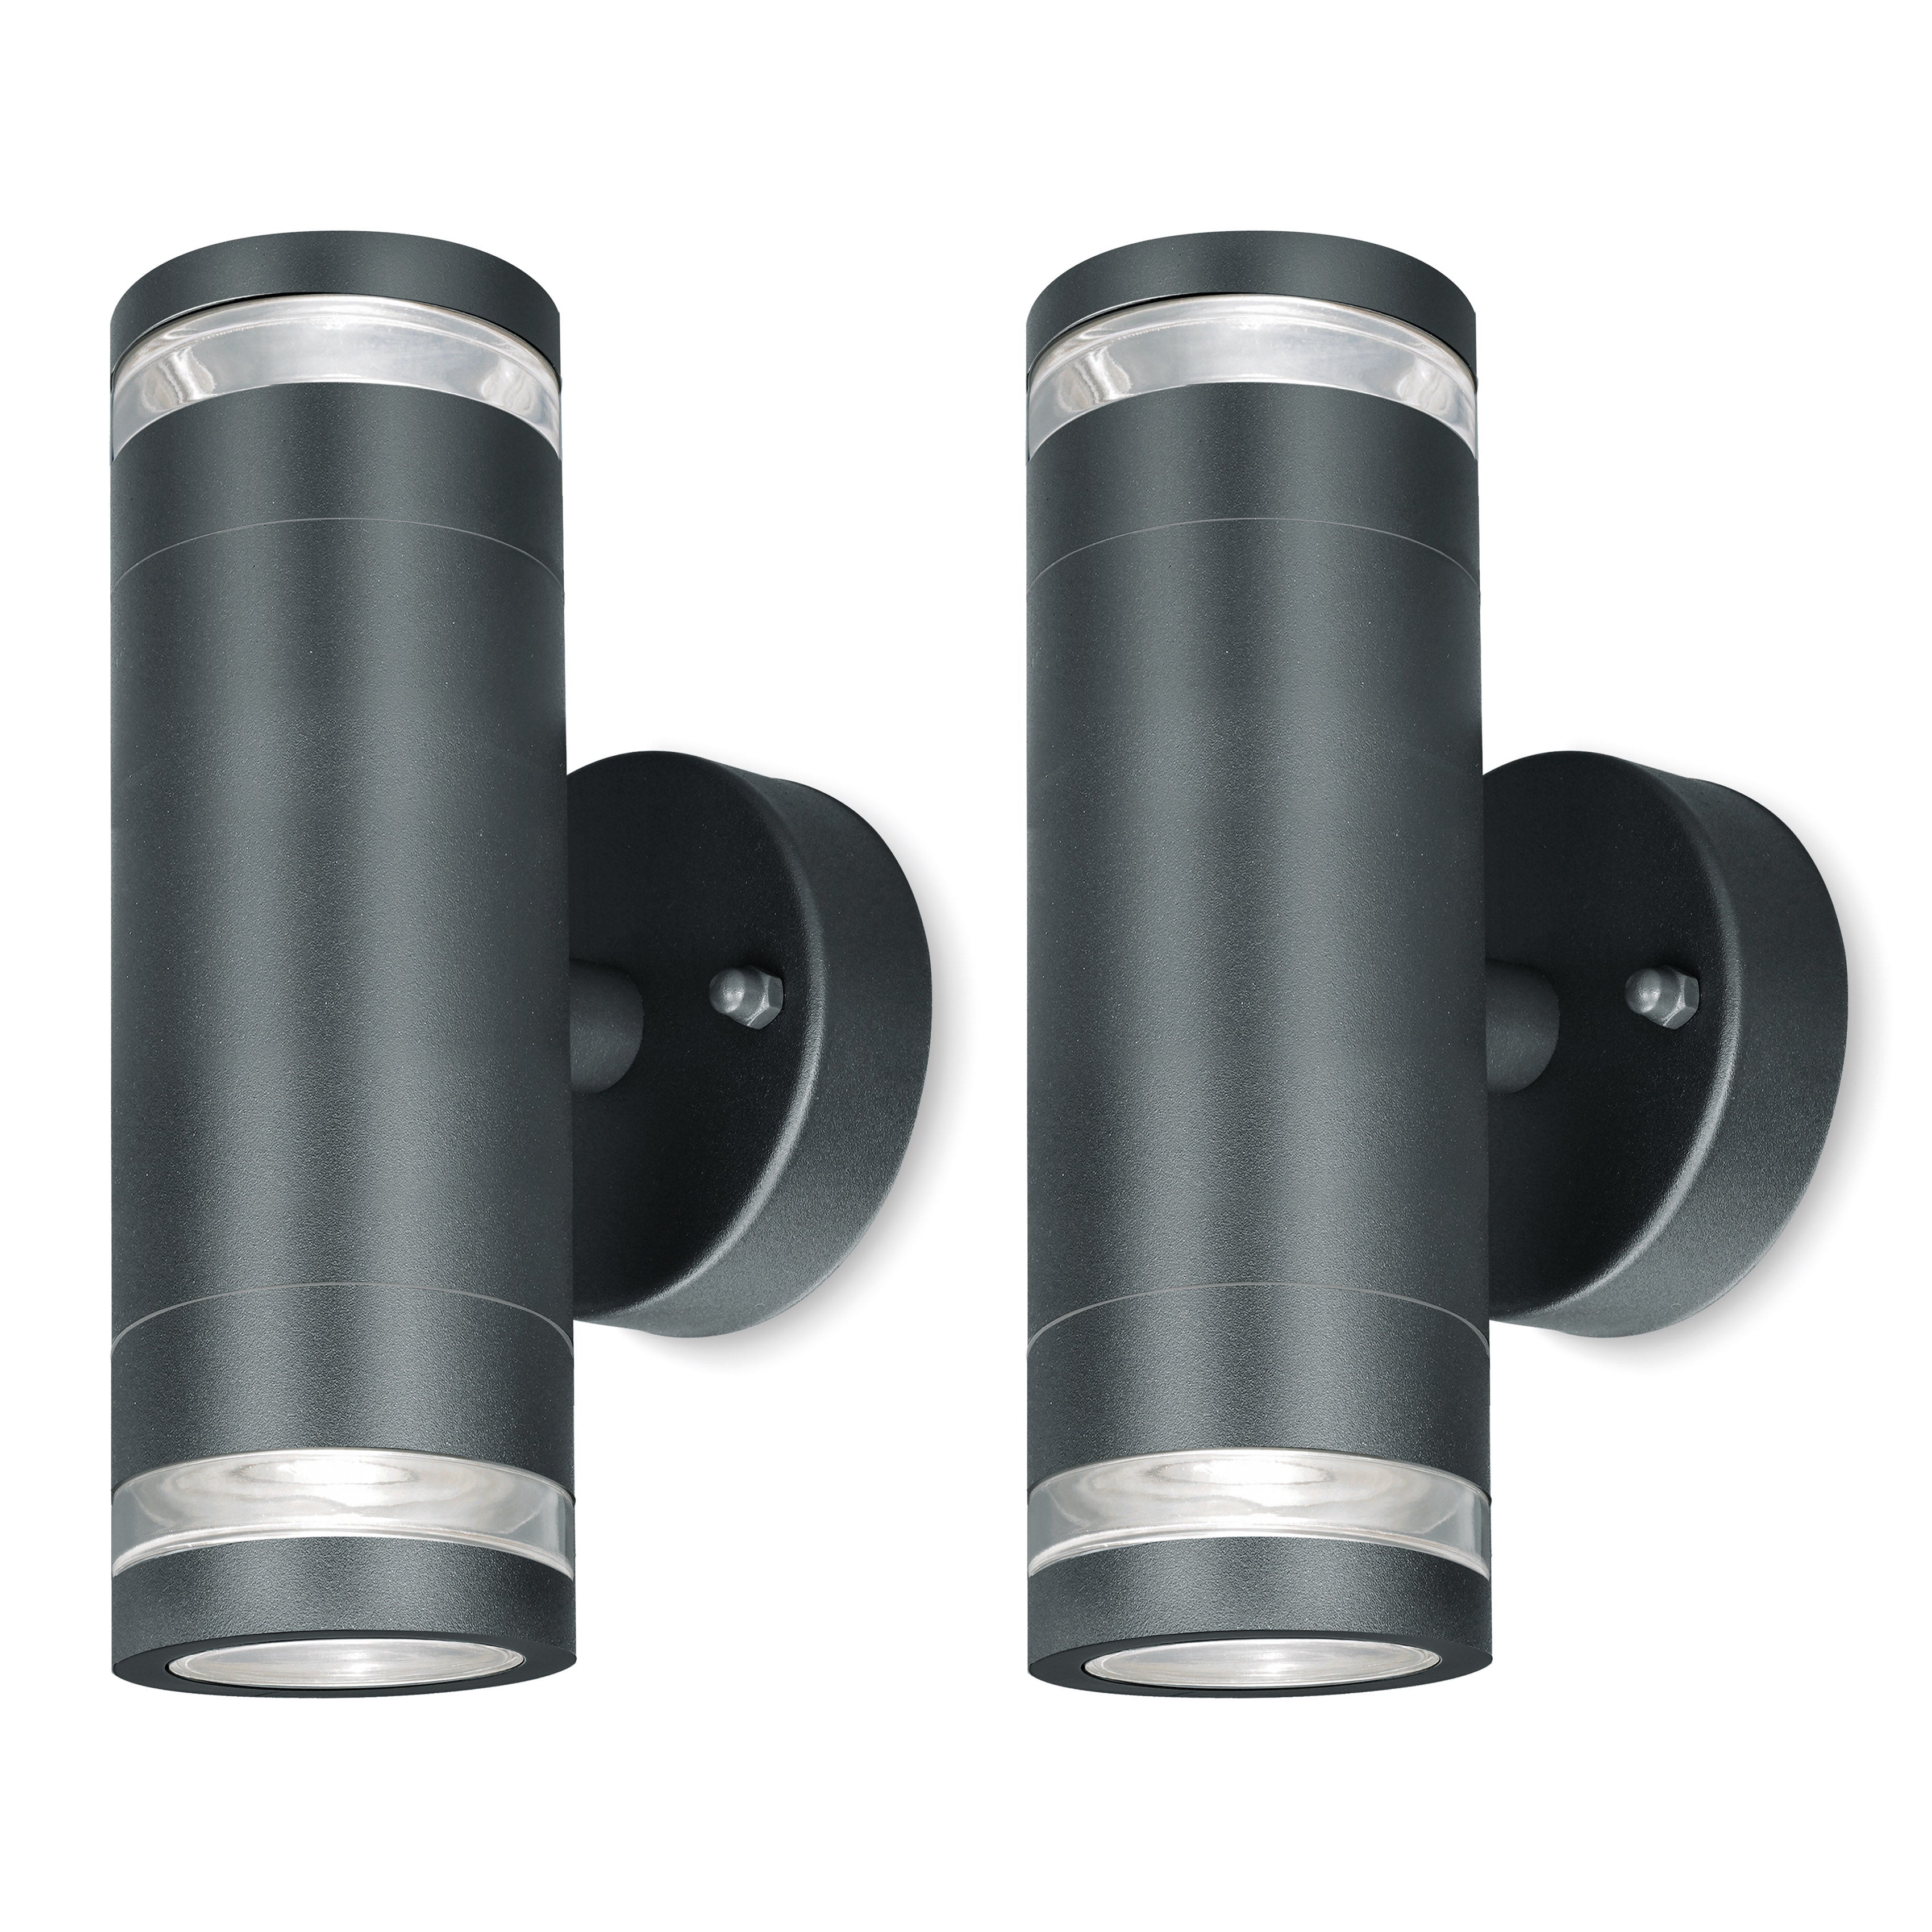 4lite Marinus GU10 Bi-Directional Outdoor Wall Light without PIR - Anthracite (Pack of 2)